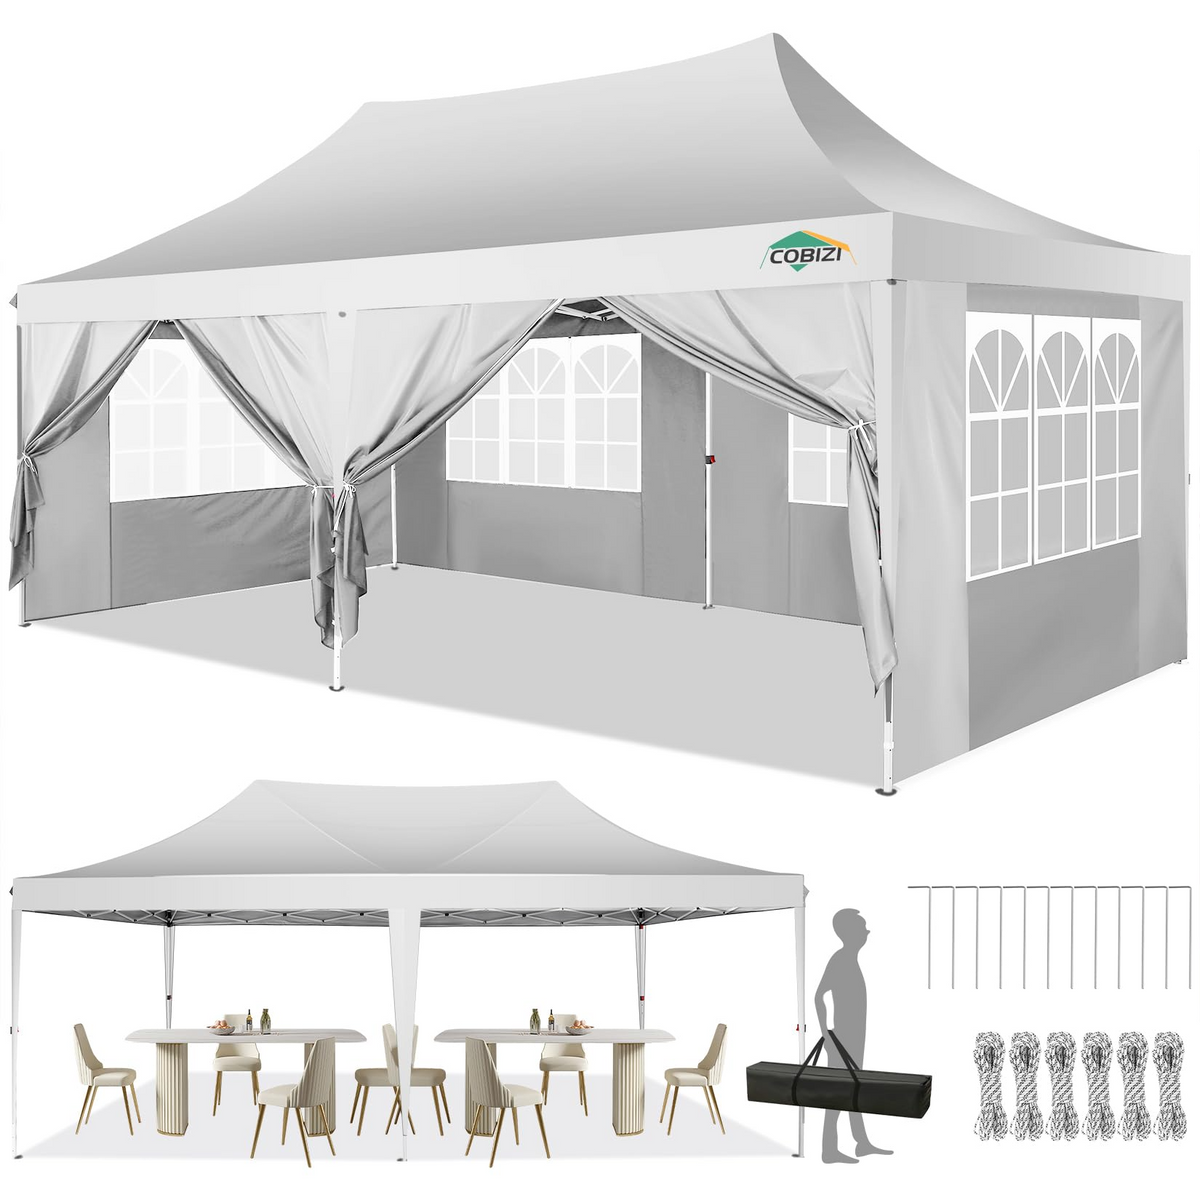 COBIZI 10x20 Pop up Canopy Gazebo, Outdoor Canopy Tent with 6 Removable Sidewalls, Easy up Sun Shade UV Blocking Waterproof Outdoor Tent for Backyard, Parties, Wedding, Birthday, BBQ, White